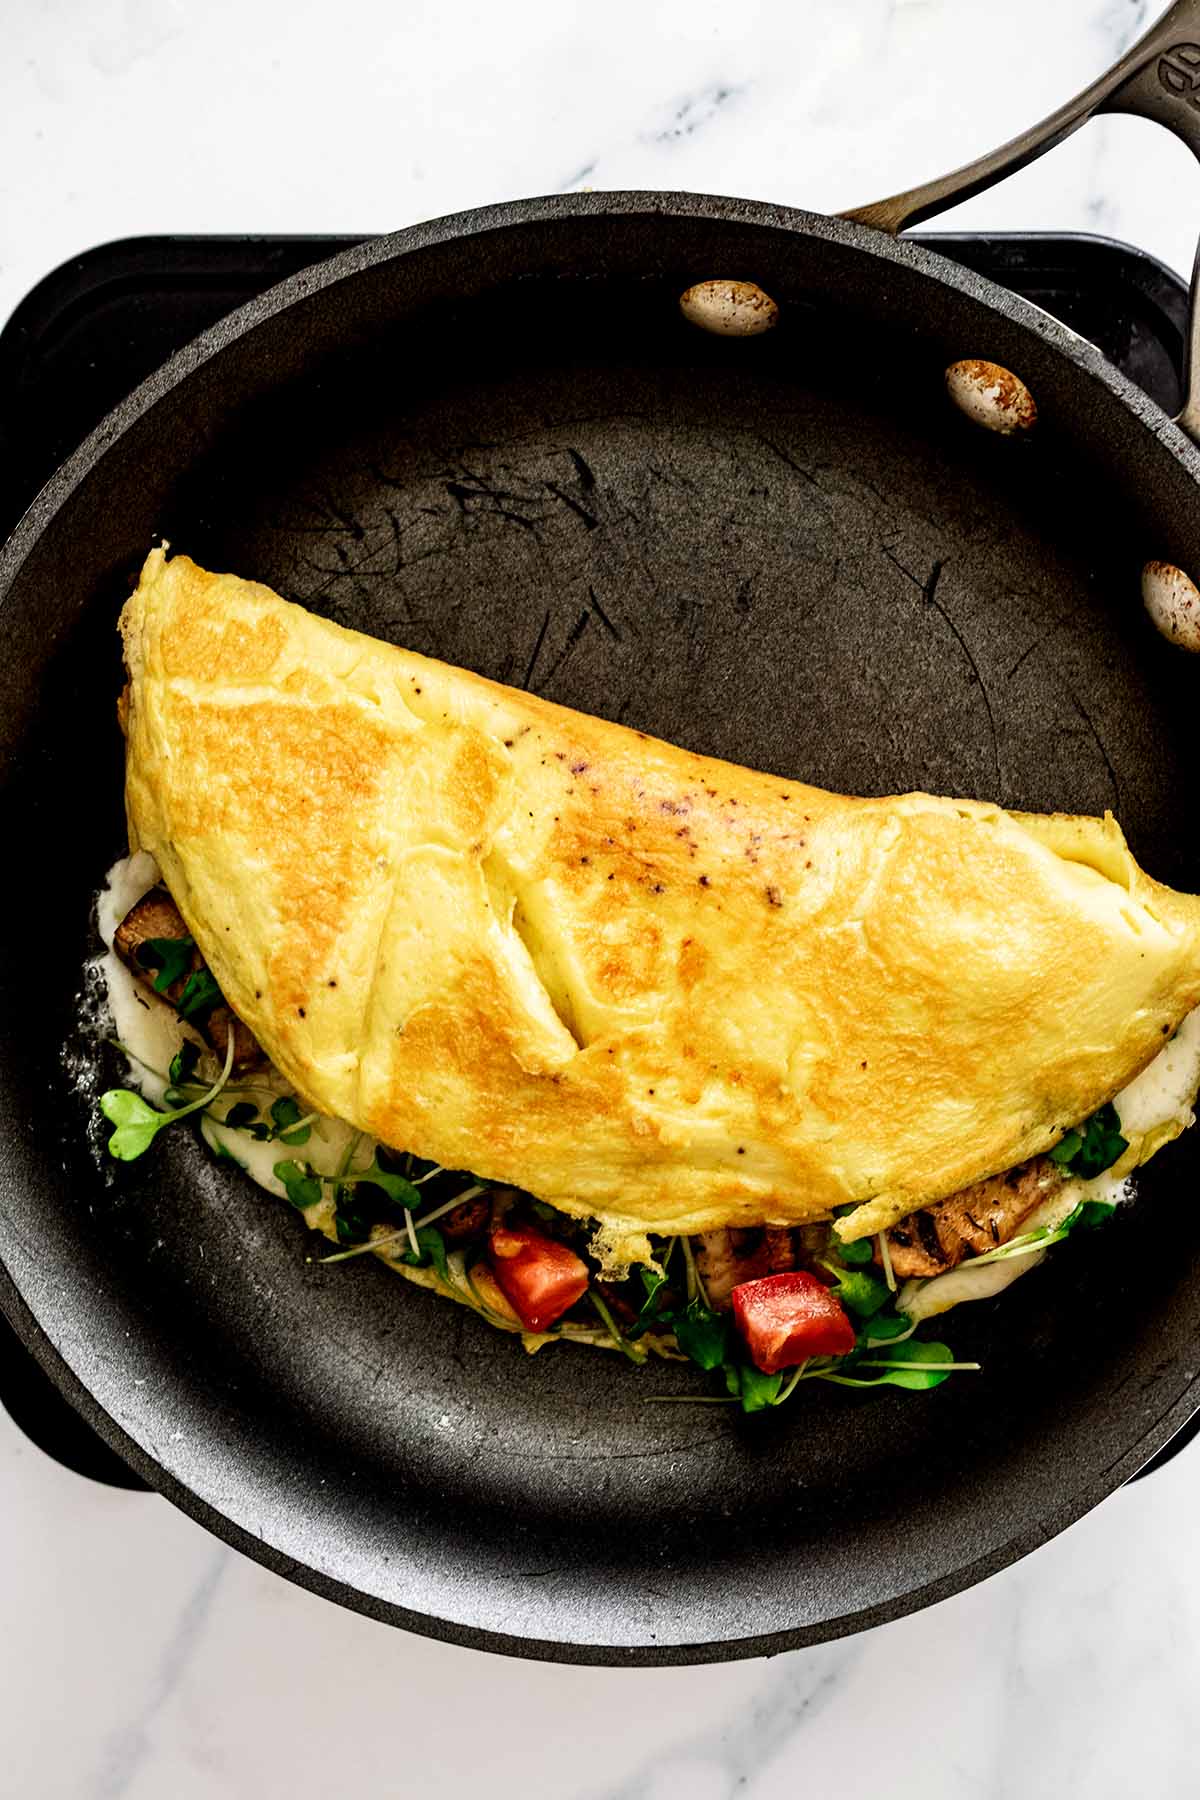 Cooked omelette in a skillet